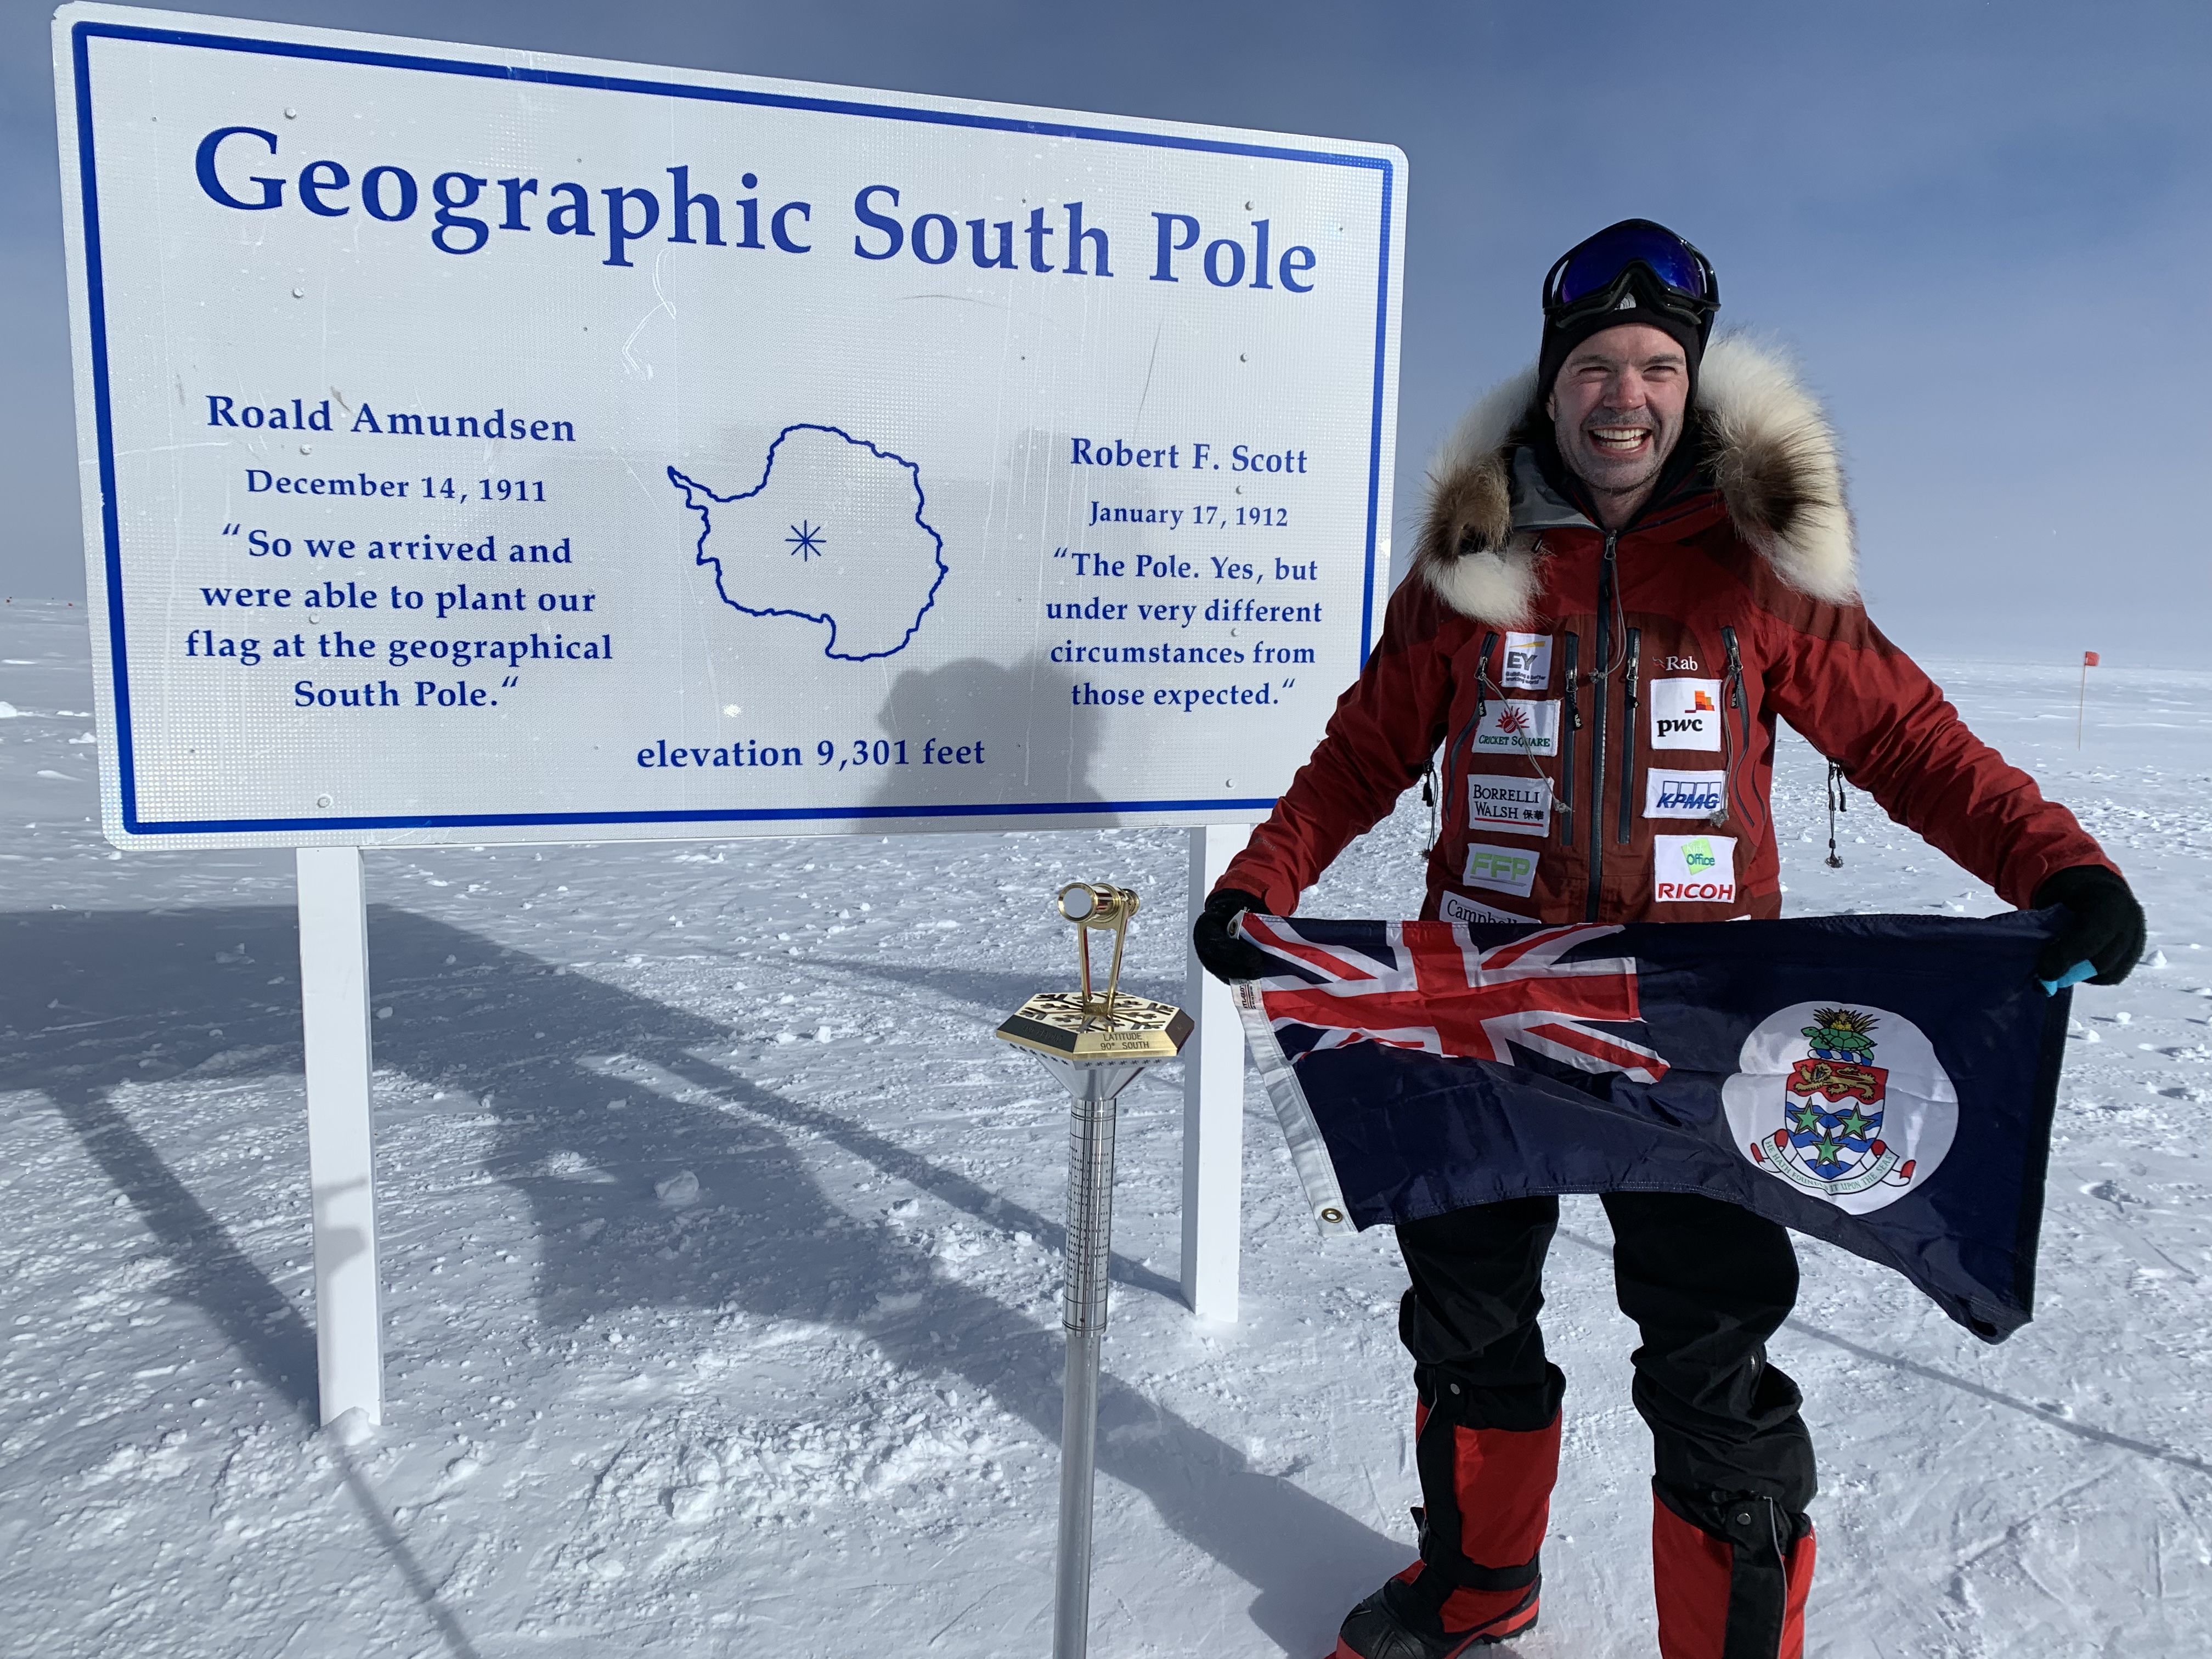 Greetings from the South Pole